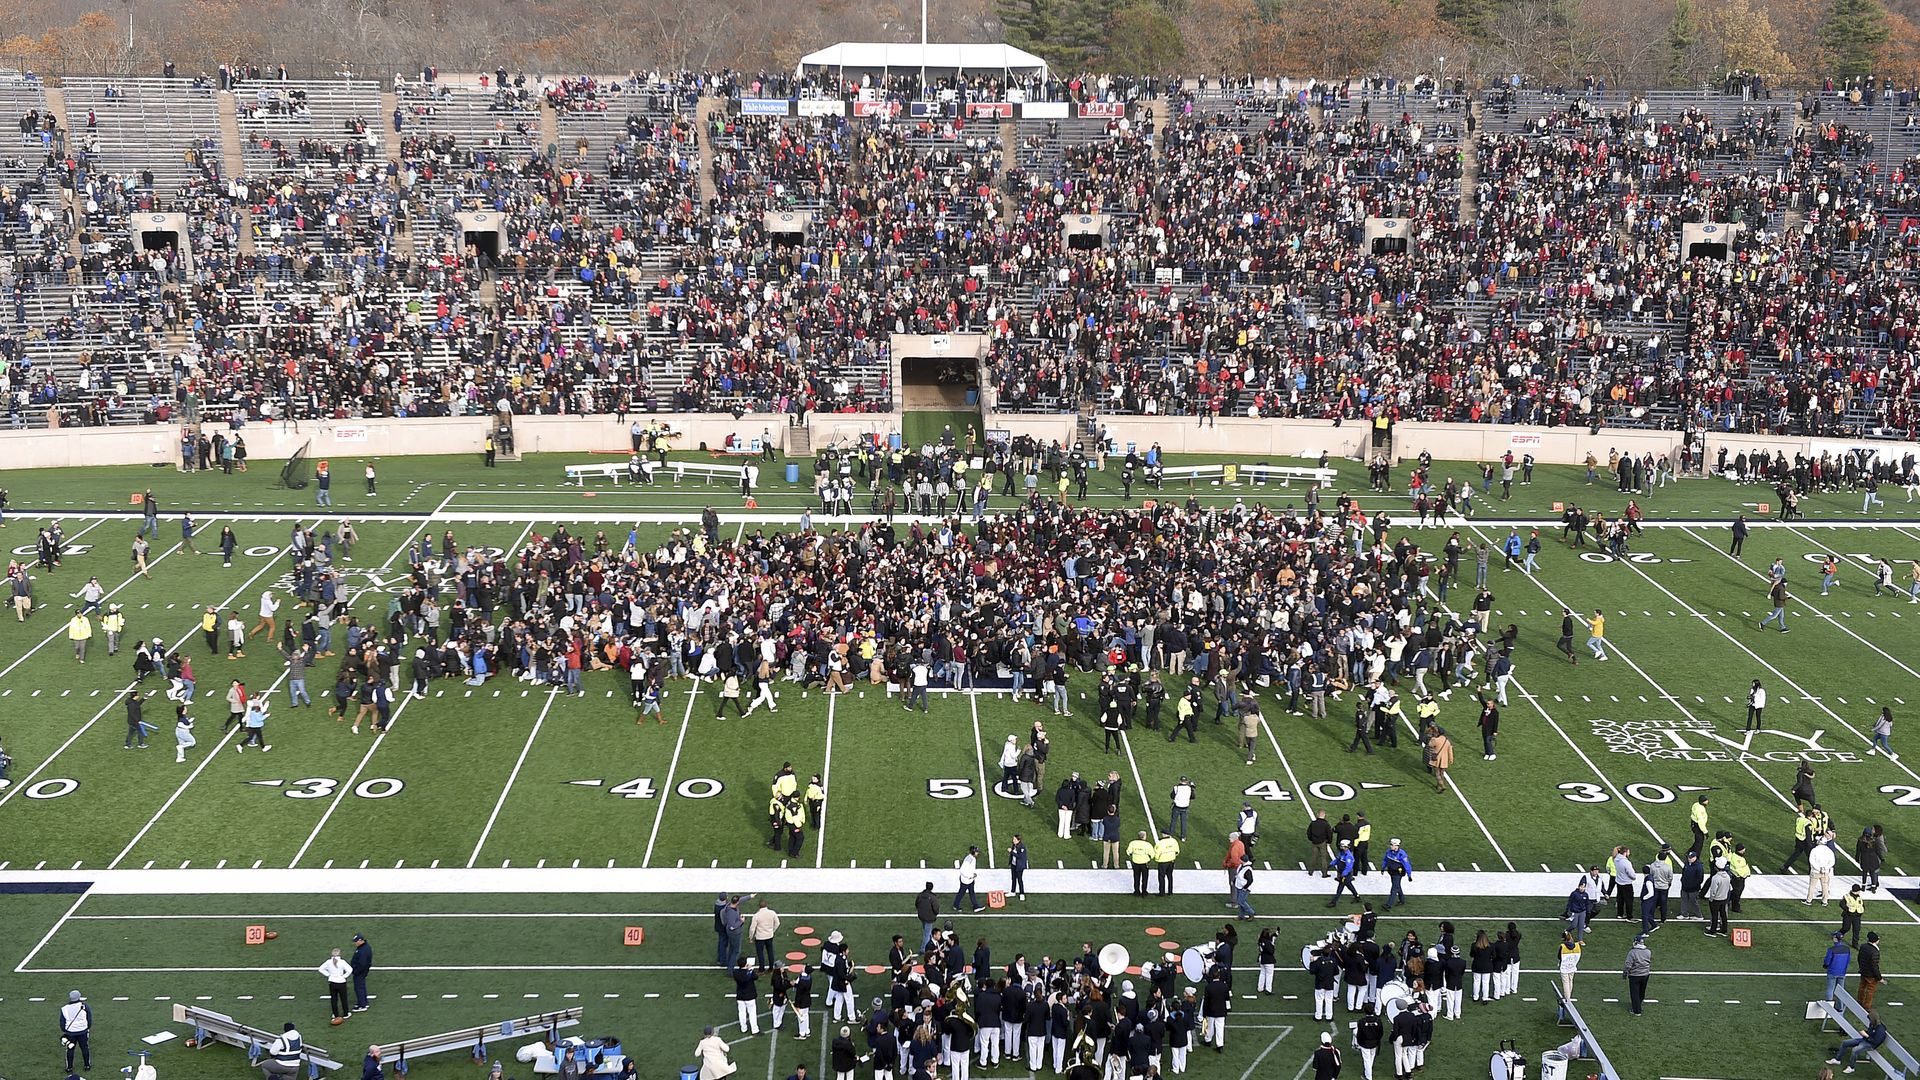 Protesters swarm the field at a Harvard-Yale football game.